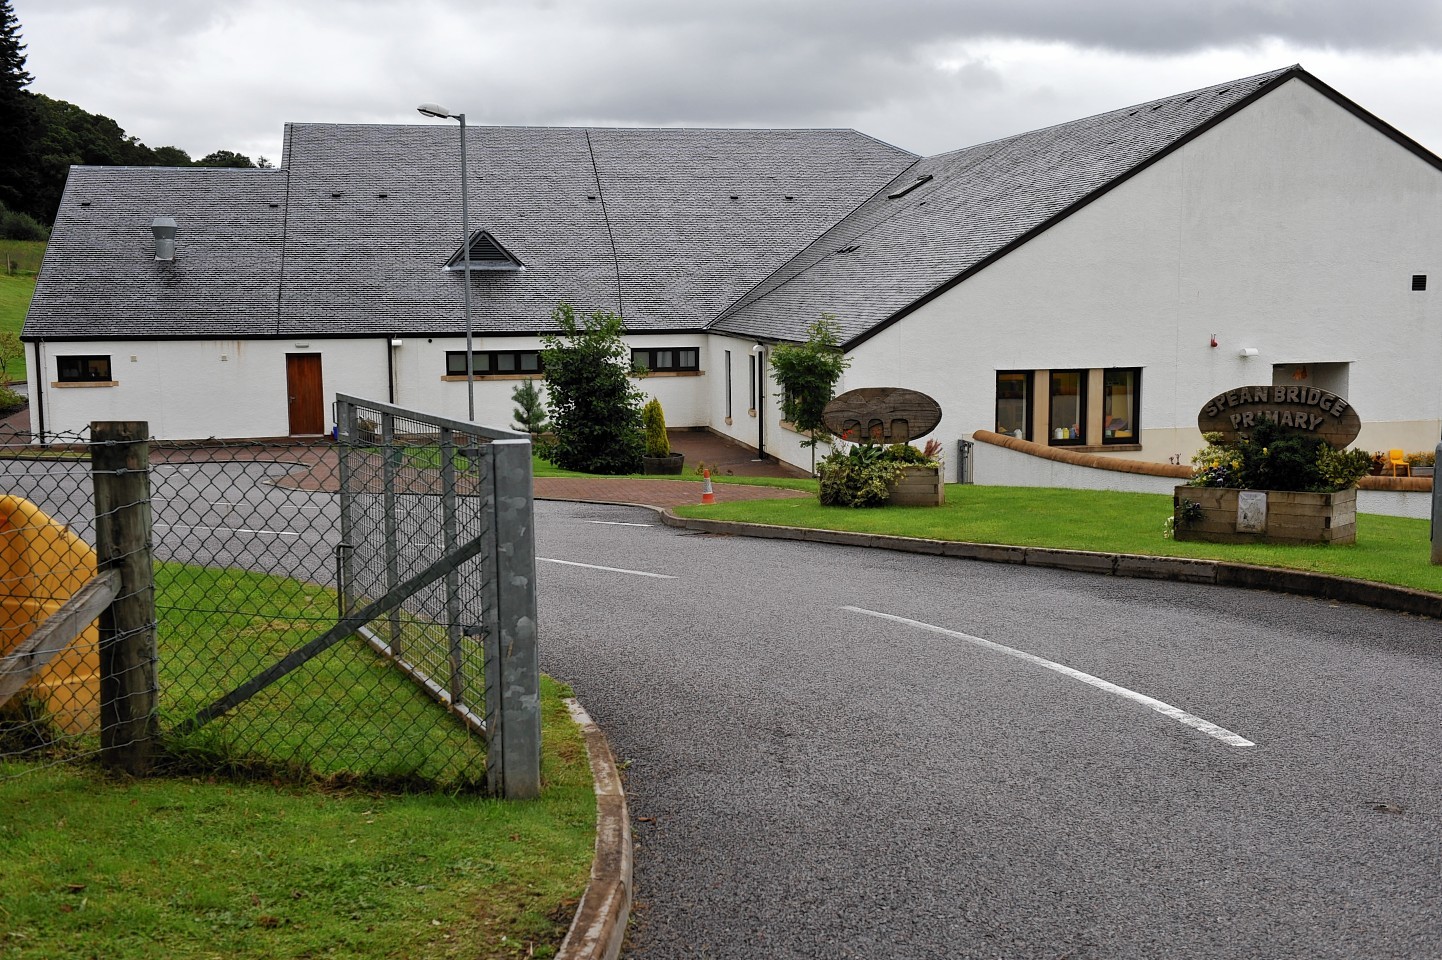 Work has been carried out to reduce the radon level at Spean Bridge Primary School